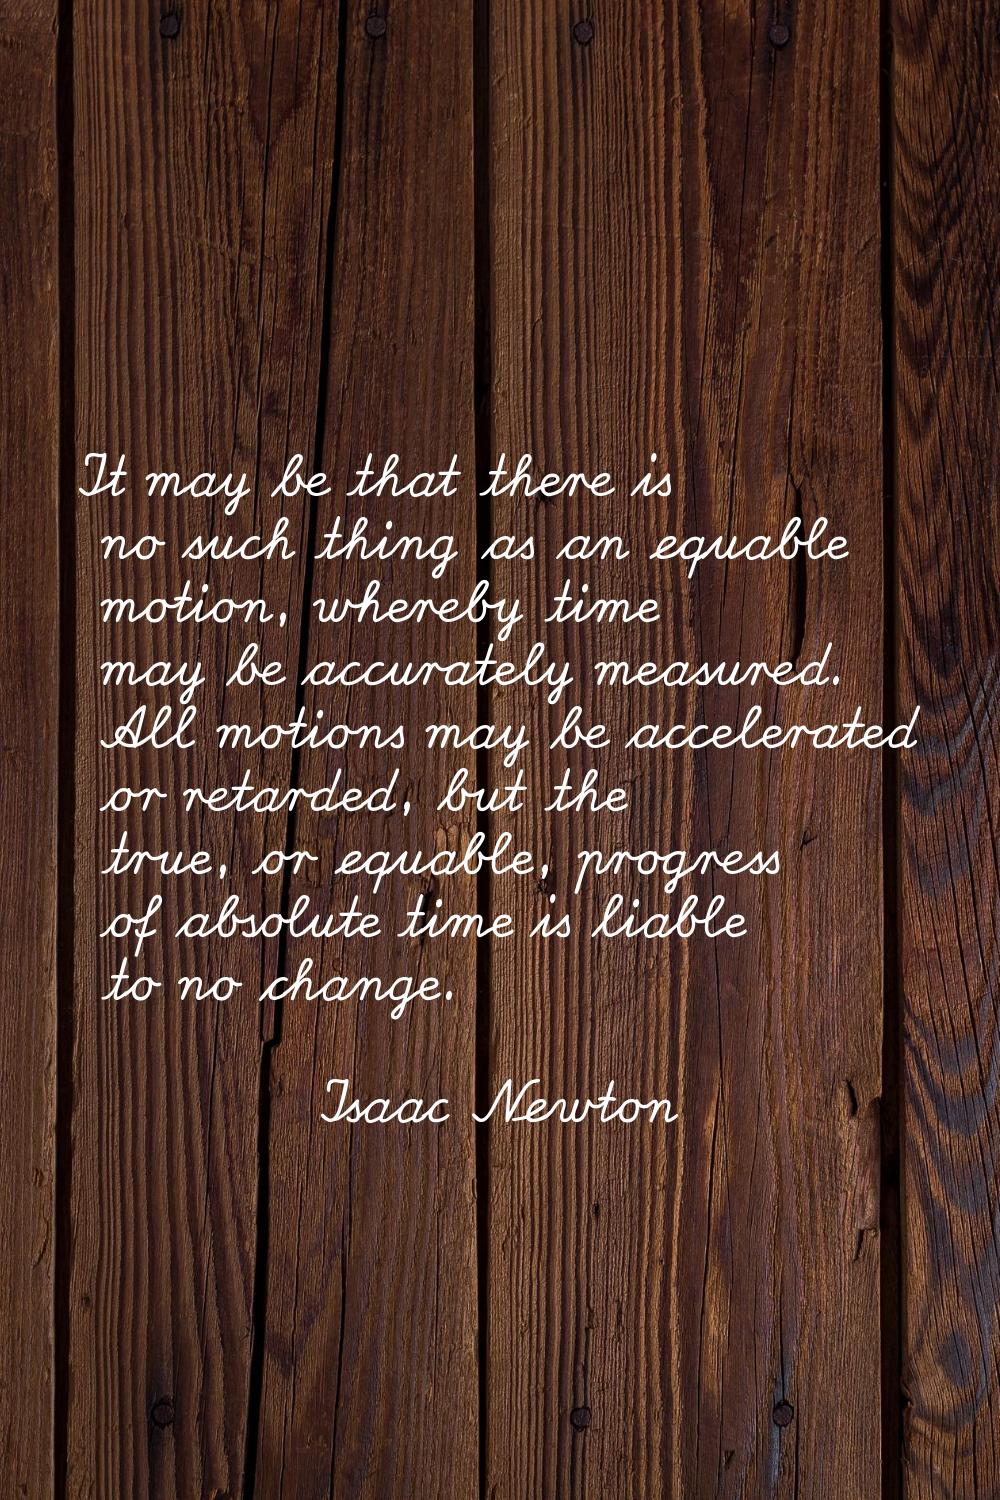 It may be that there is no such thing as an equable motion, whereby time may be accurately measured